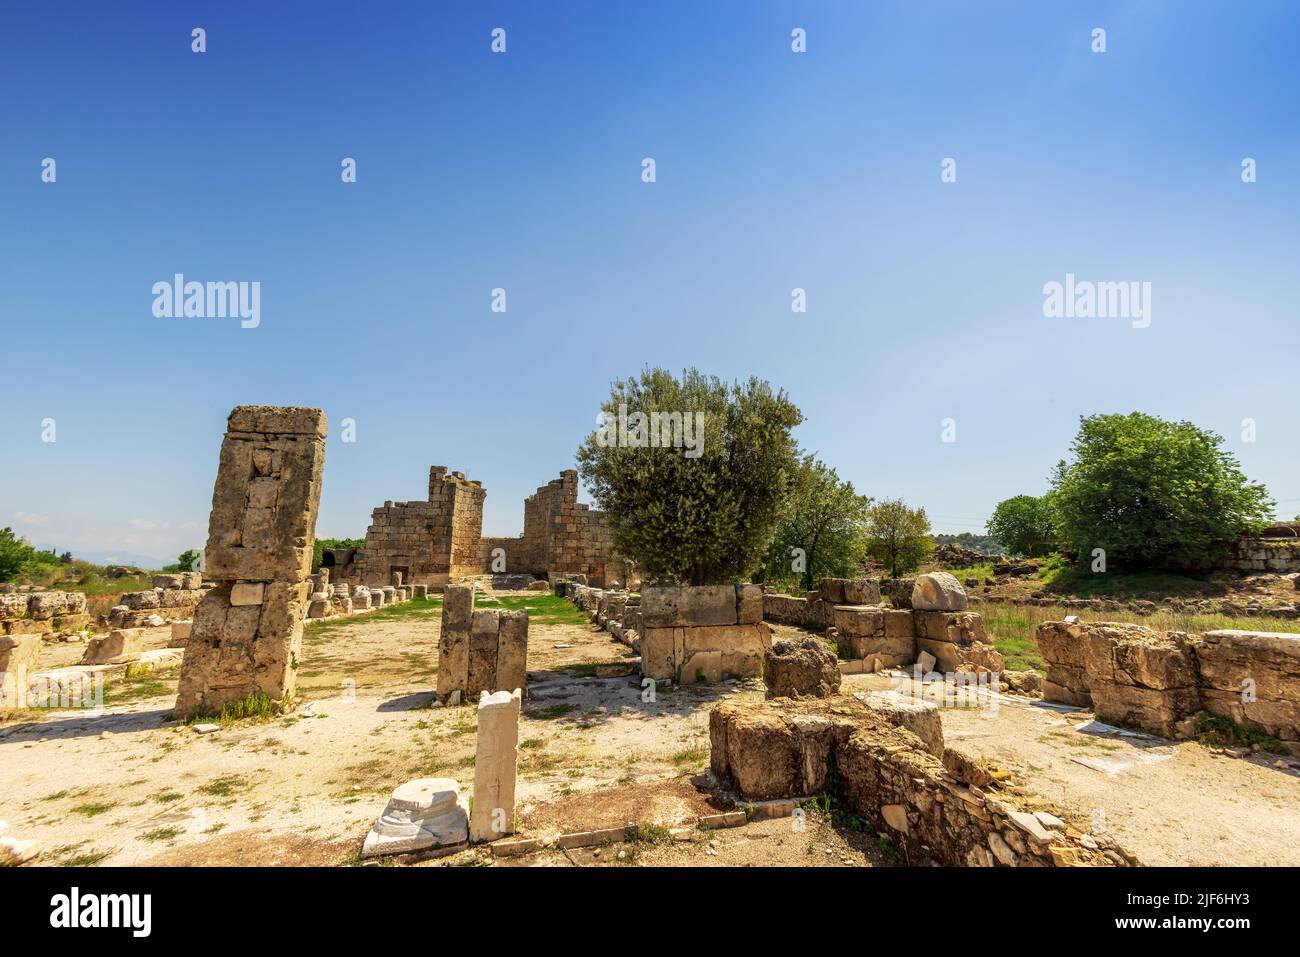 Ruins of ancient Byzantine basilica, the early-Roman Christian church, preserved in Perge, Antalya, Turkey. Stock Photo